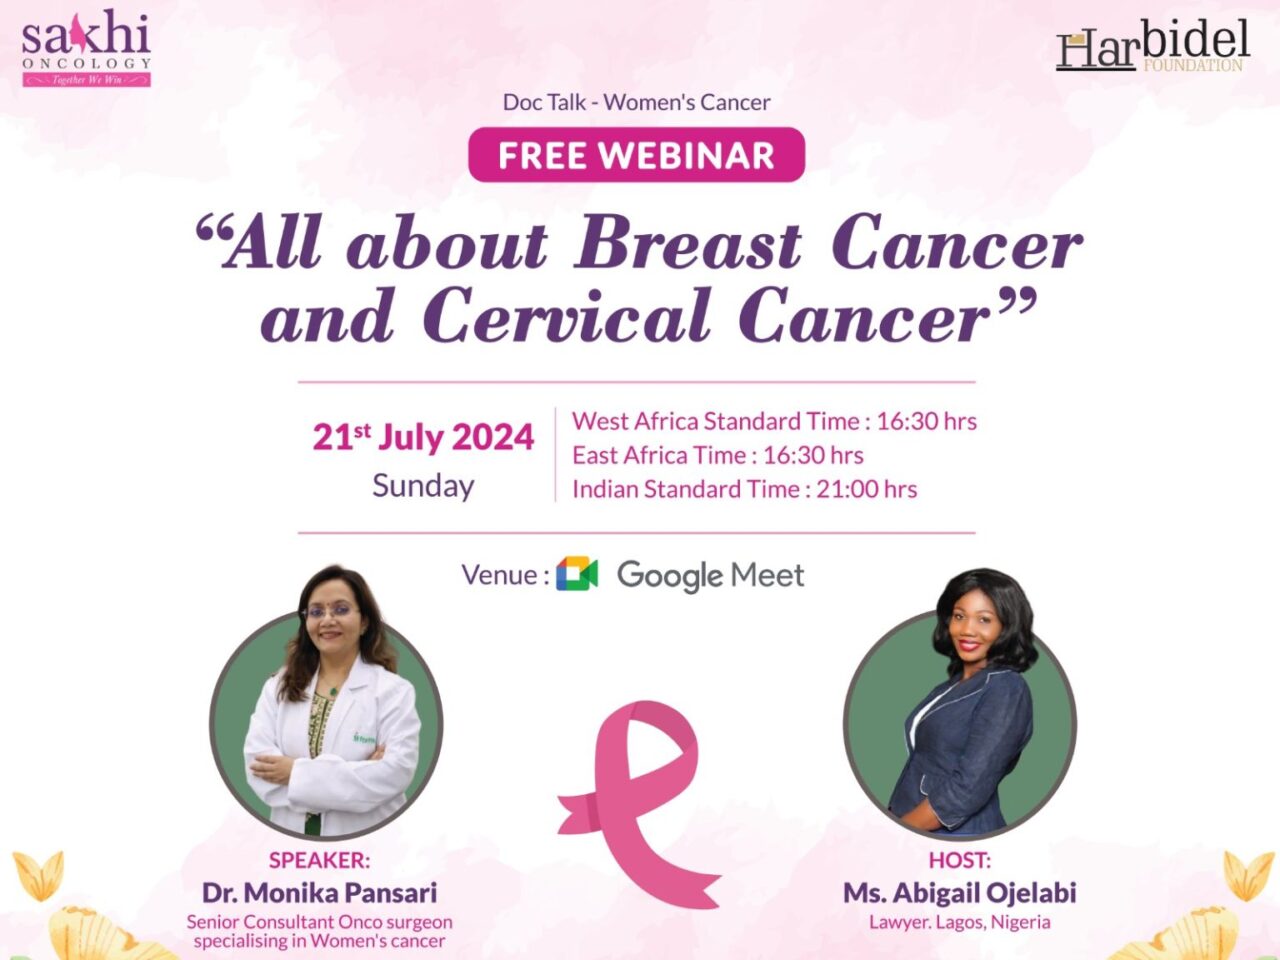 Monika Pansari: “All About Breast and Cervical Cancer” on July 21